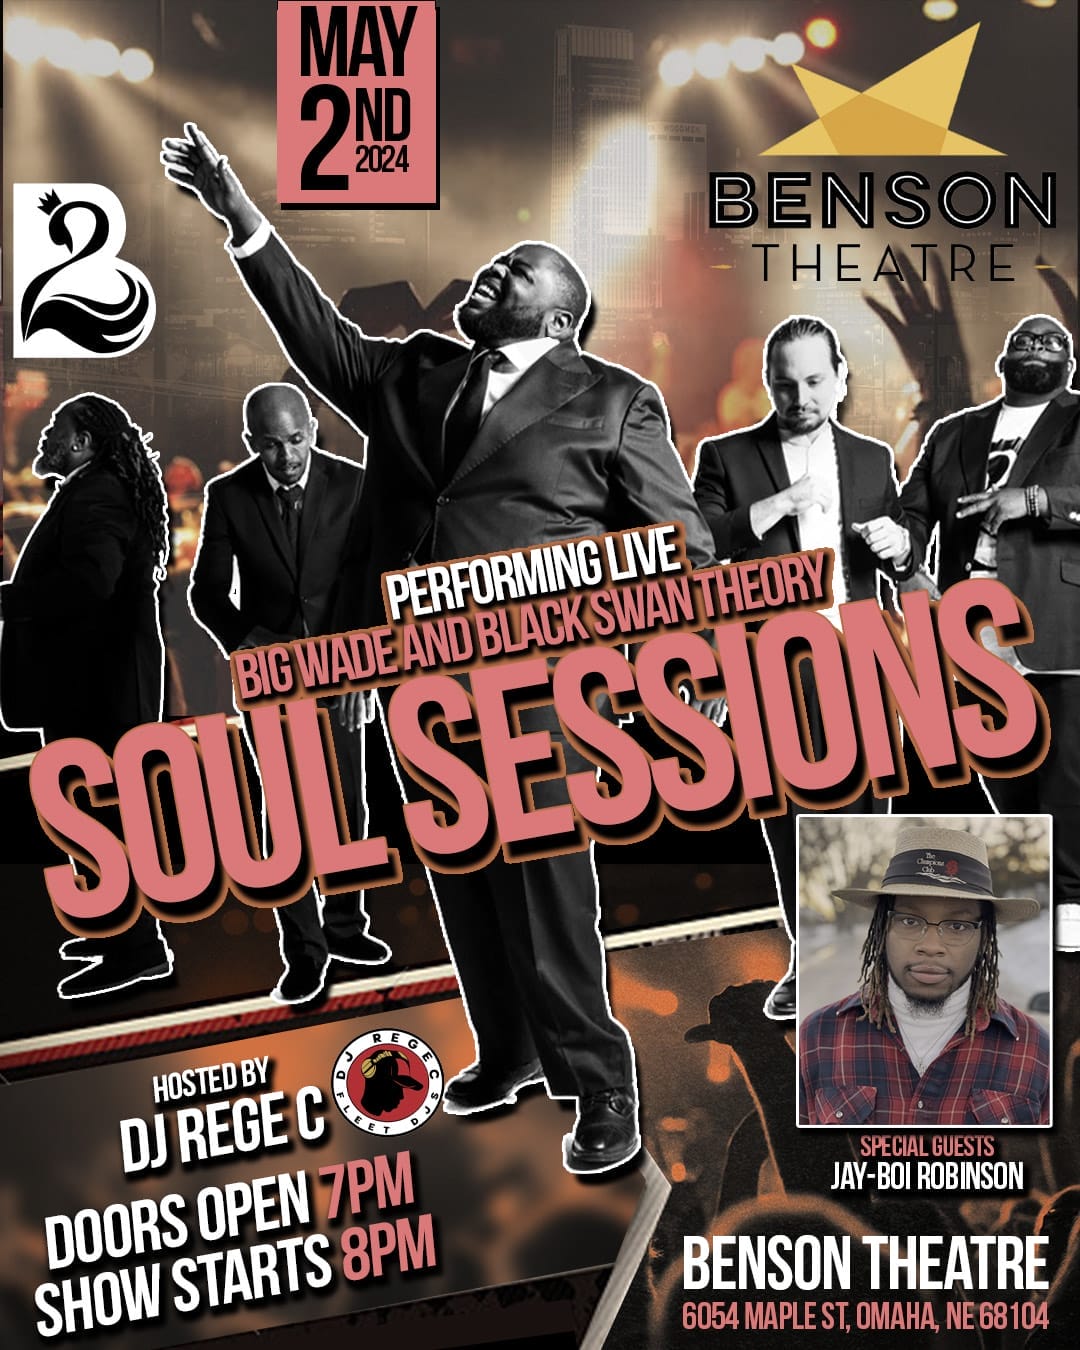 Soul Sessions Featuring Big Wade and Black Swan Theory and Jay-Boi Robinson, hosted by DJ REGE C